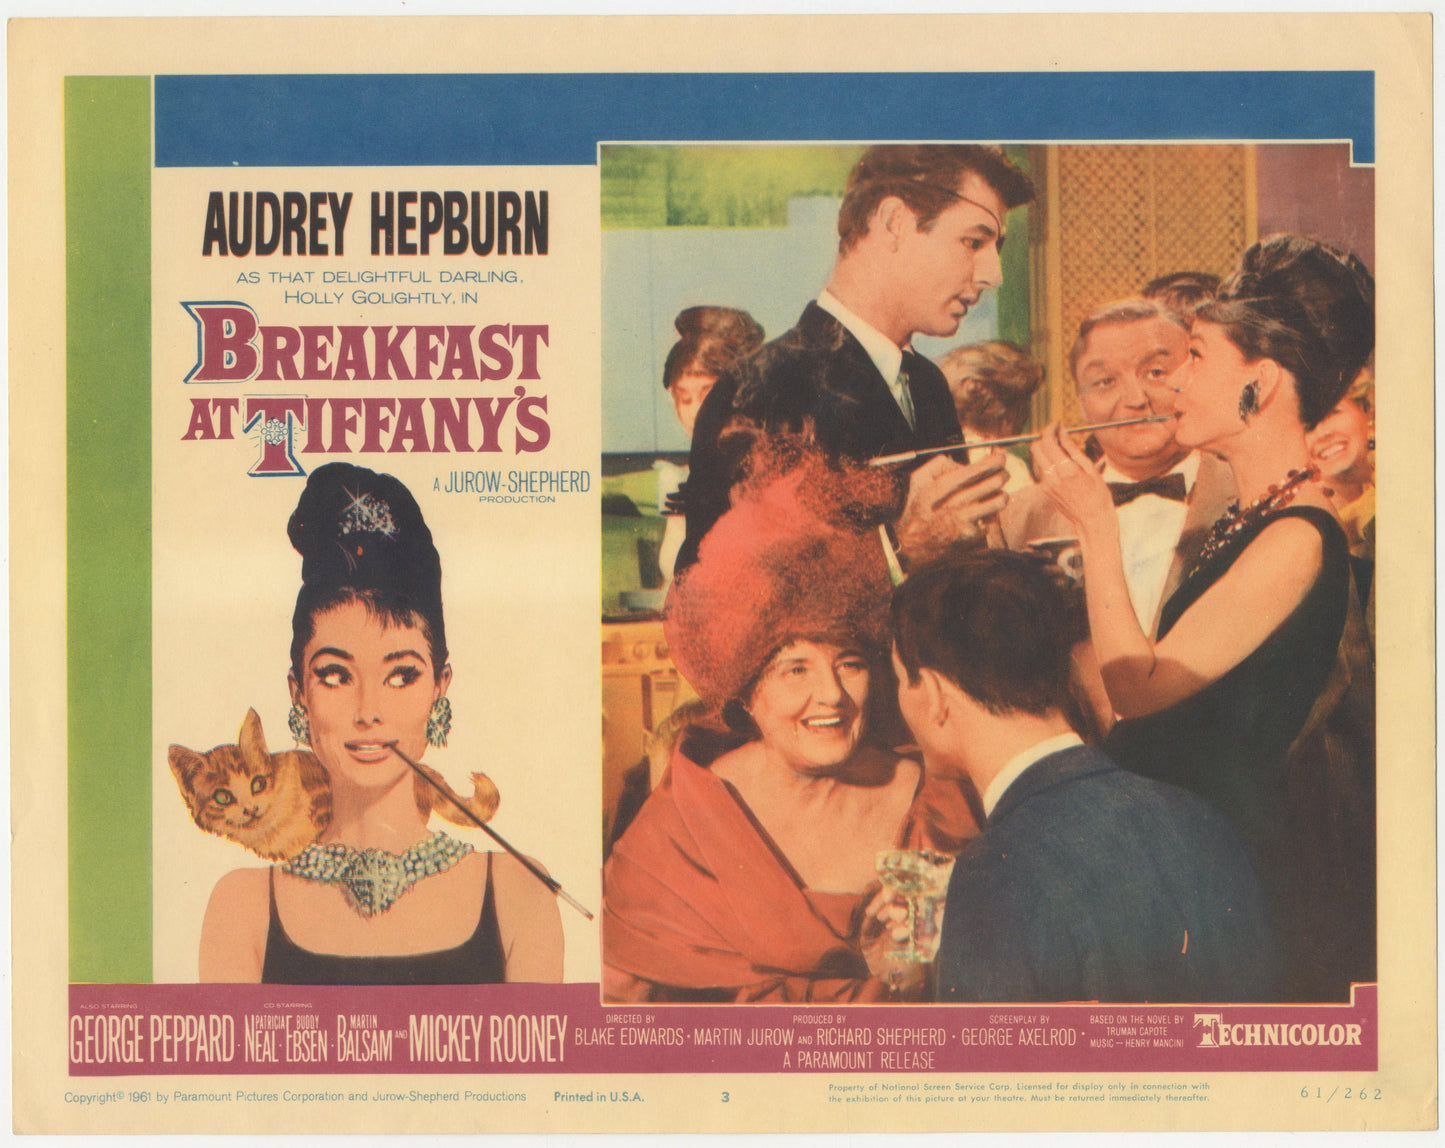 Breakfast At Tiffany's US Lobby Card #3 (1961) - ORIGINAL RELEASE - posterpalace.com